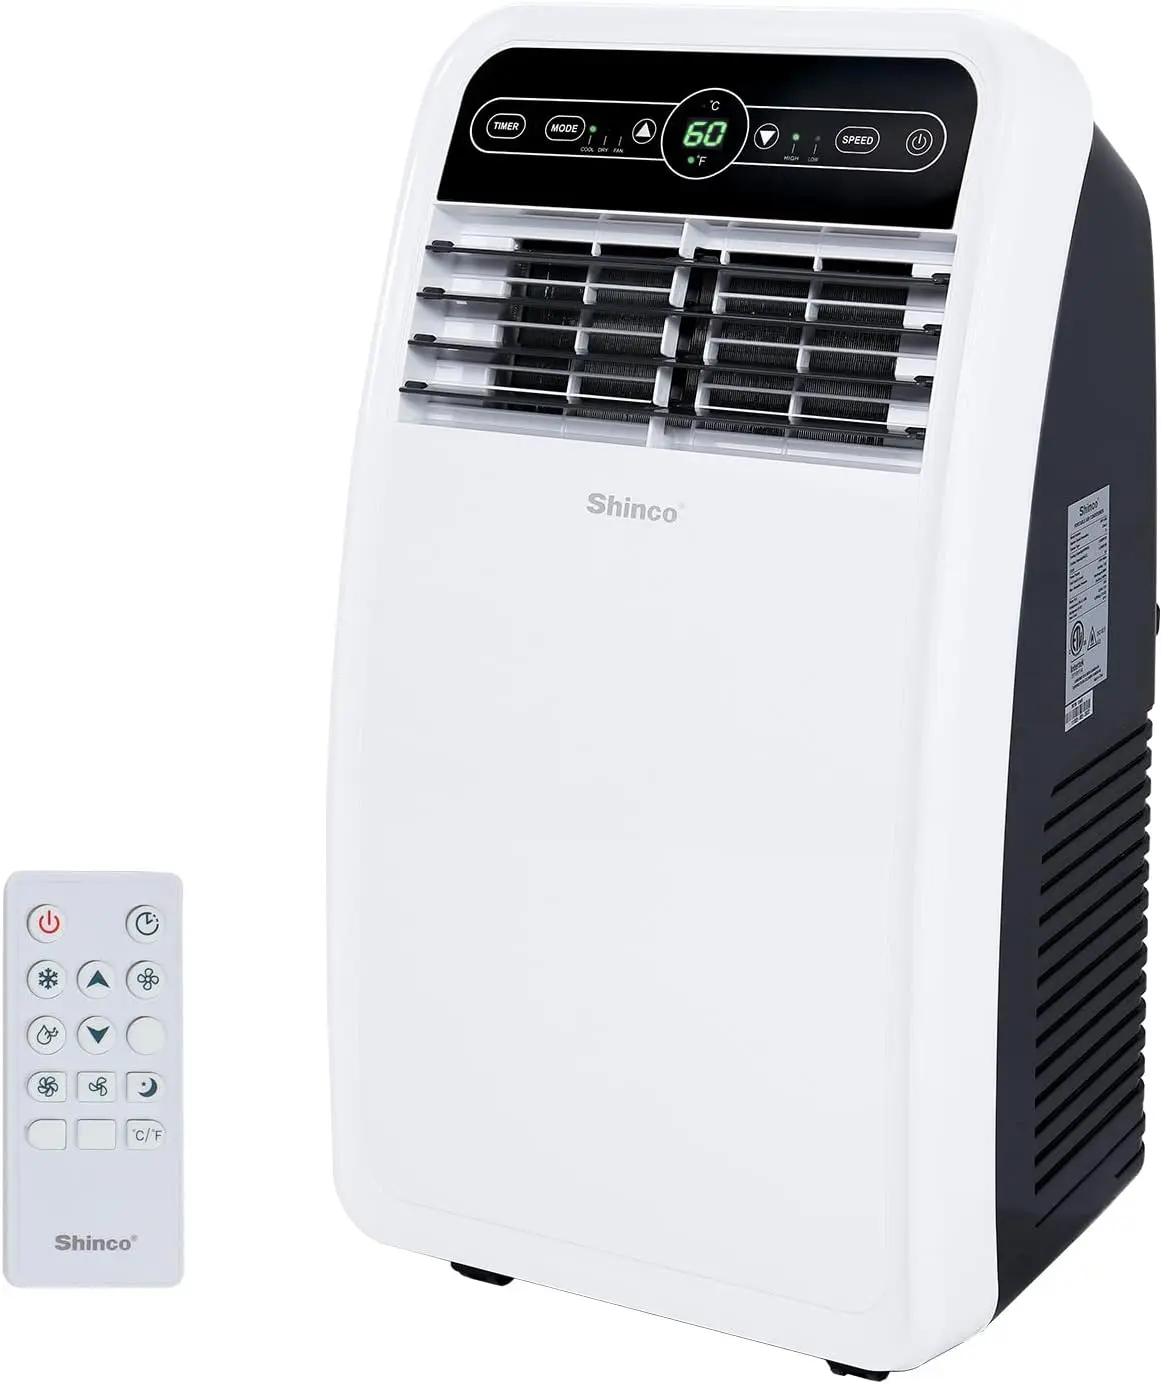 

Portable Air Conditioner,AC Unit with Built-in Cool, Dehumidifier&Fan Modes for Room up to 200sq.ft,24 Hour Timer